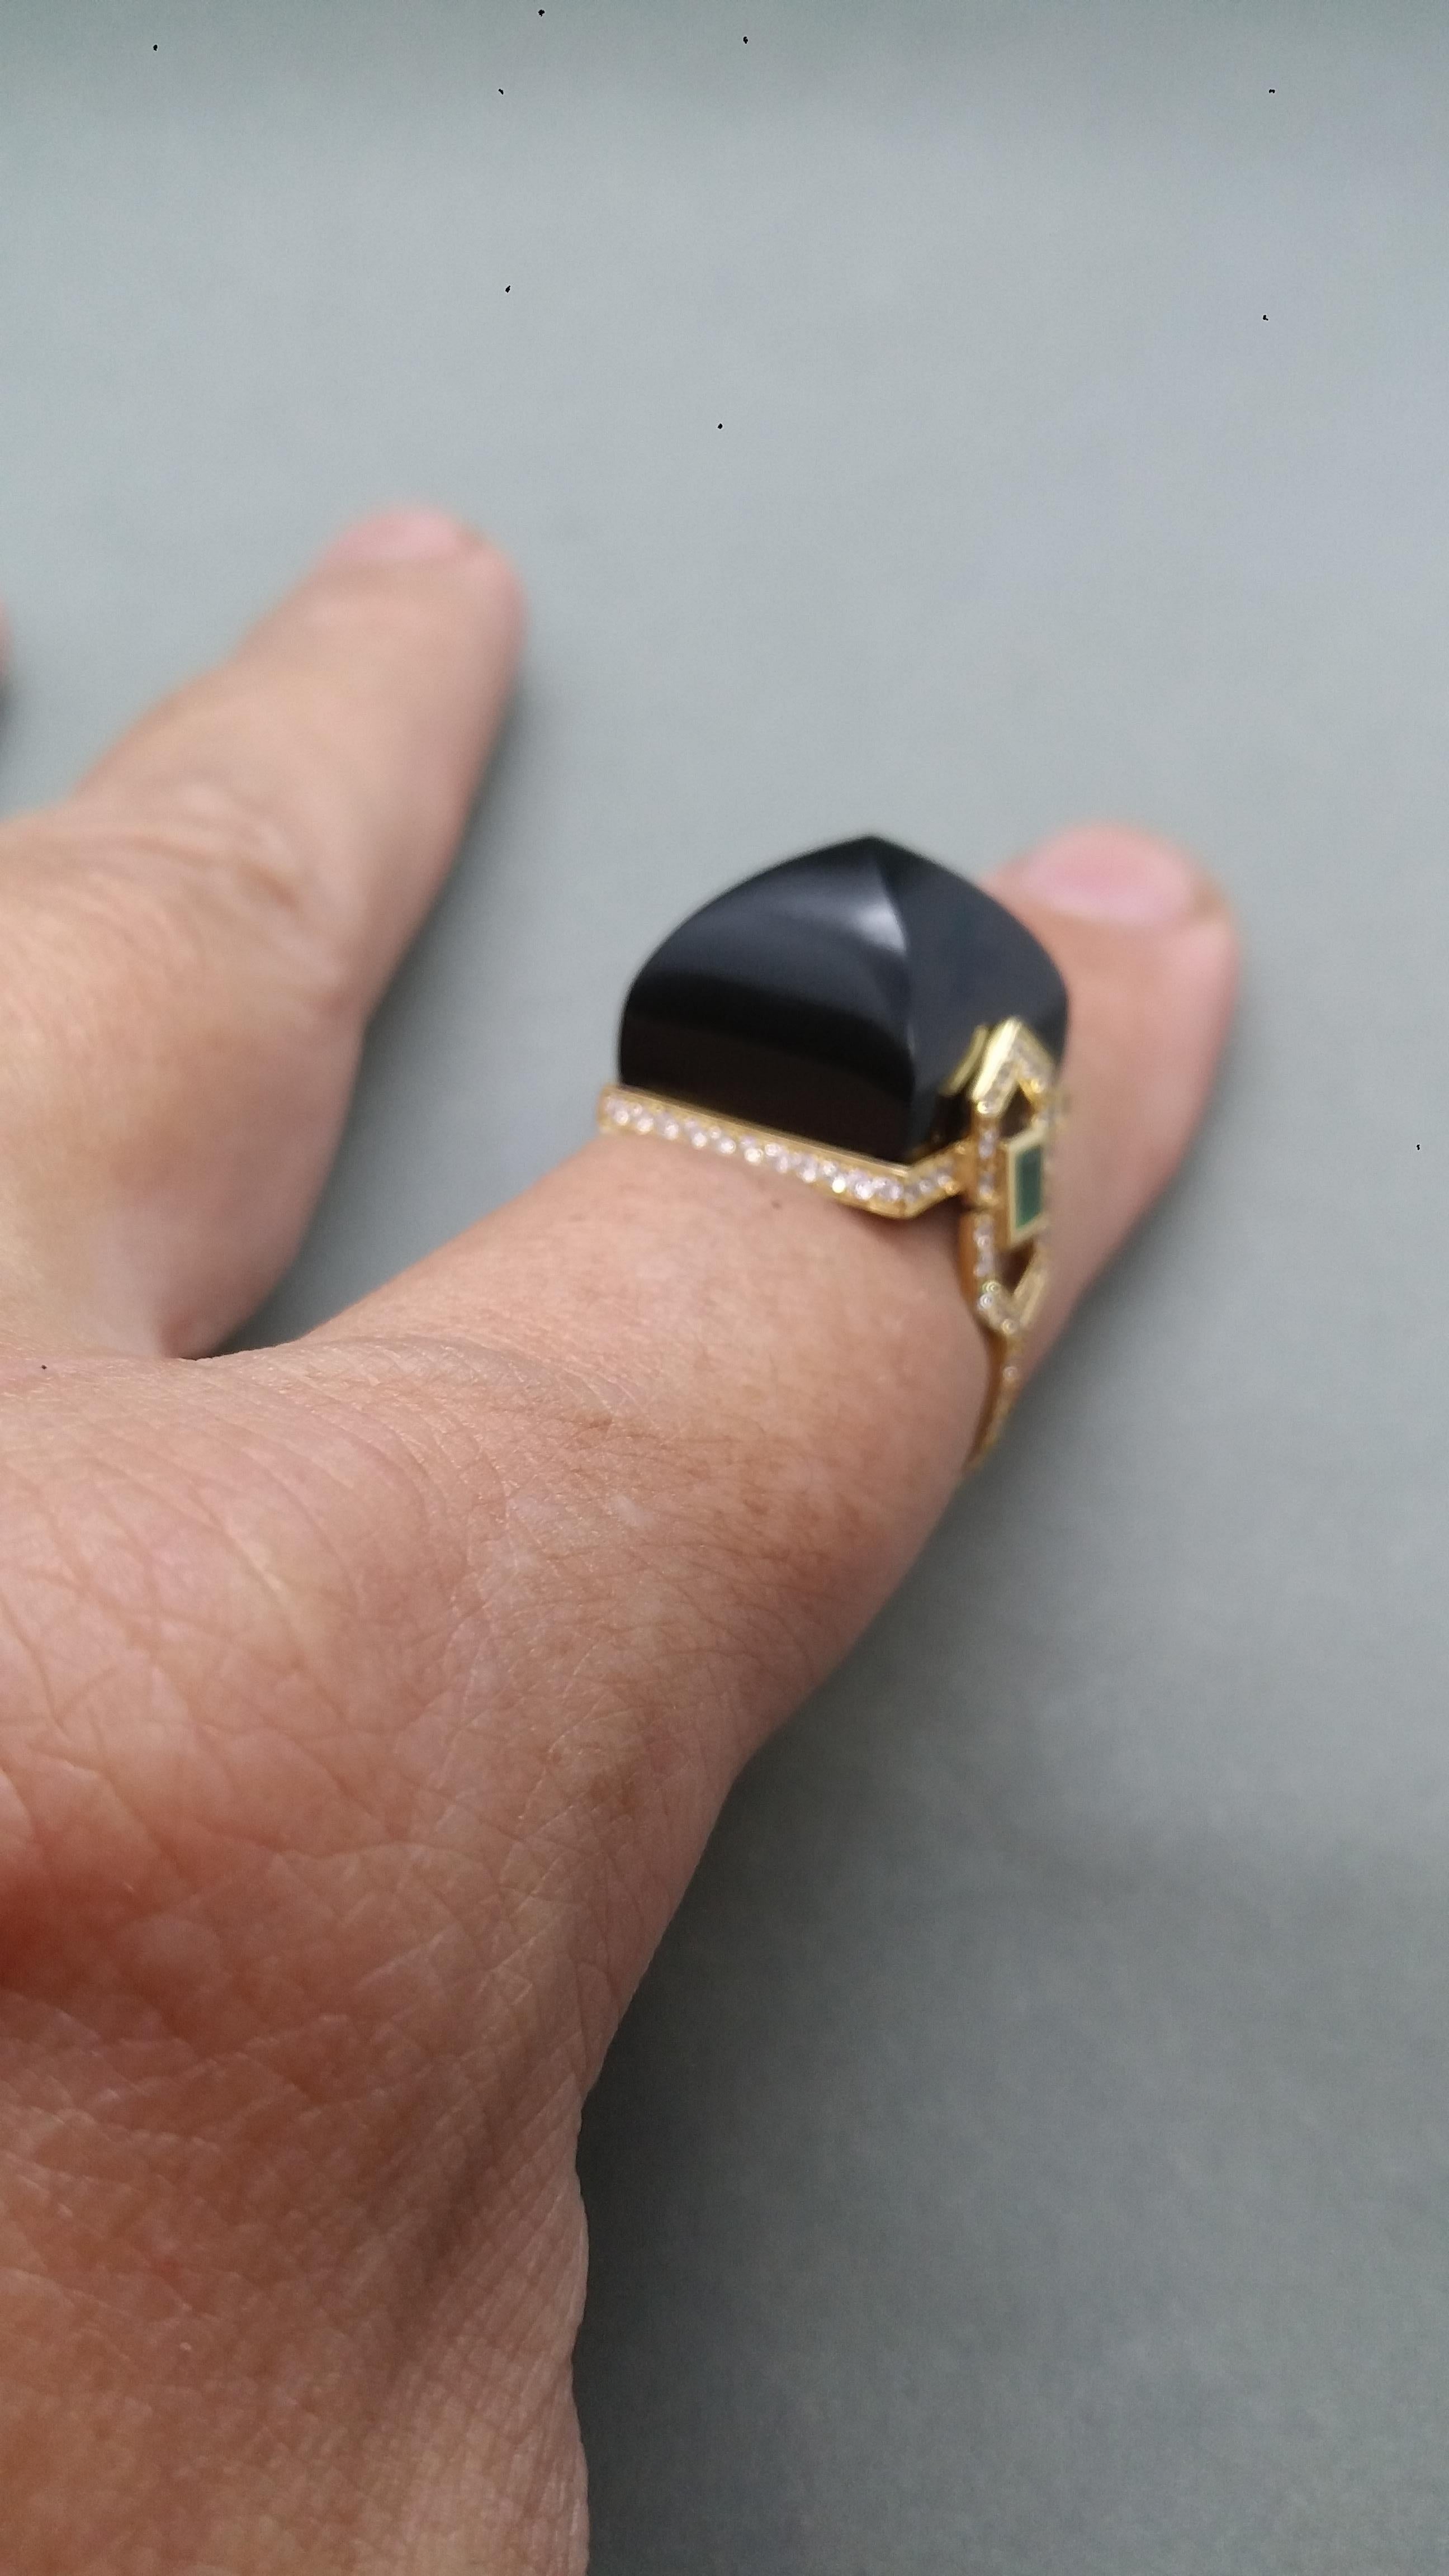 Unique and classic handmade Art Deco Style cocktail ring with a Black Onyx Pyramid measuring 16x16 mm set in a 14 kt yellow gold mounting,including full cut diamonds and 2 small Emerald baguettes on the sides.
In 1978 our workshop started in Italy